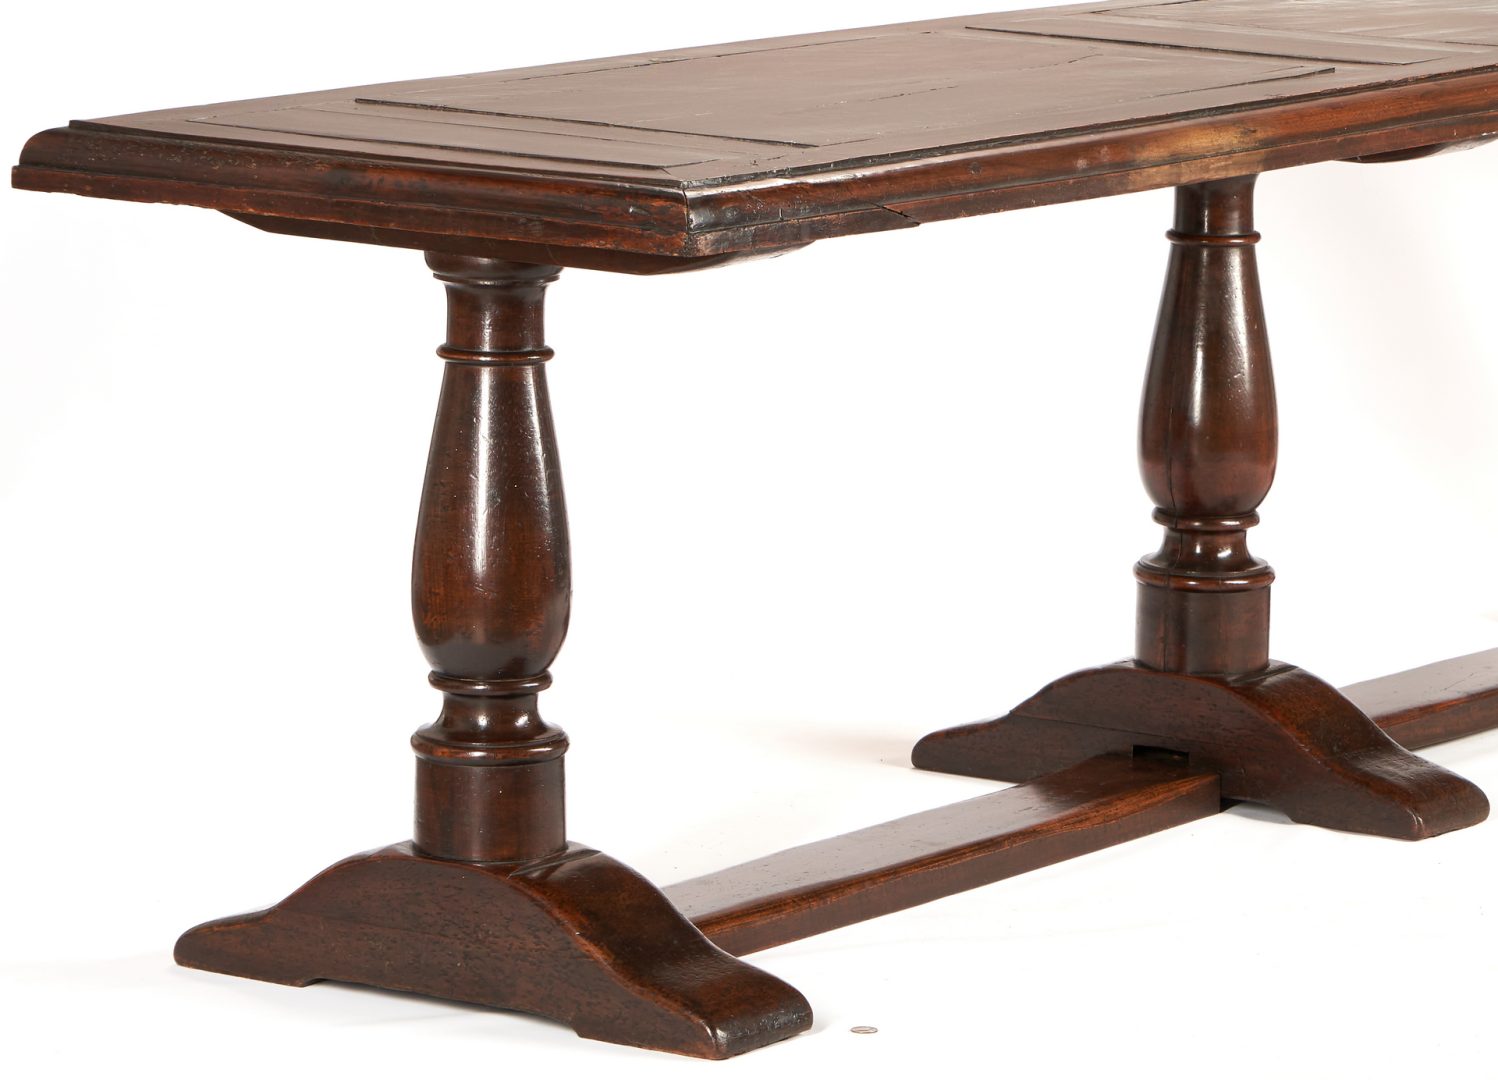 Lot 544: Italian or Continental Baroque Style Refectory Table, Late 19th Century